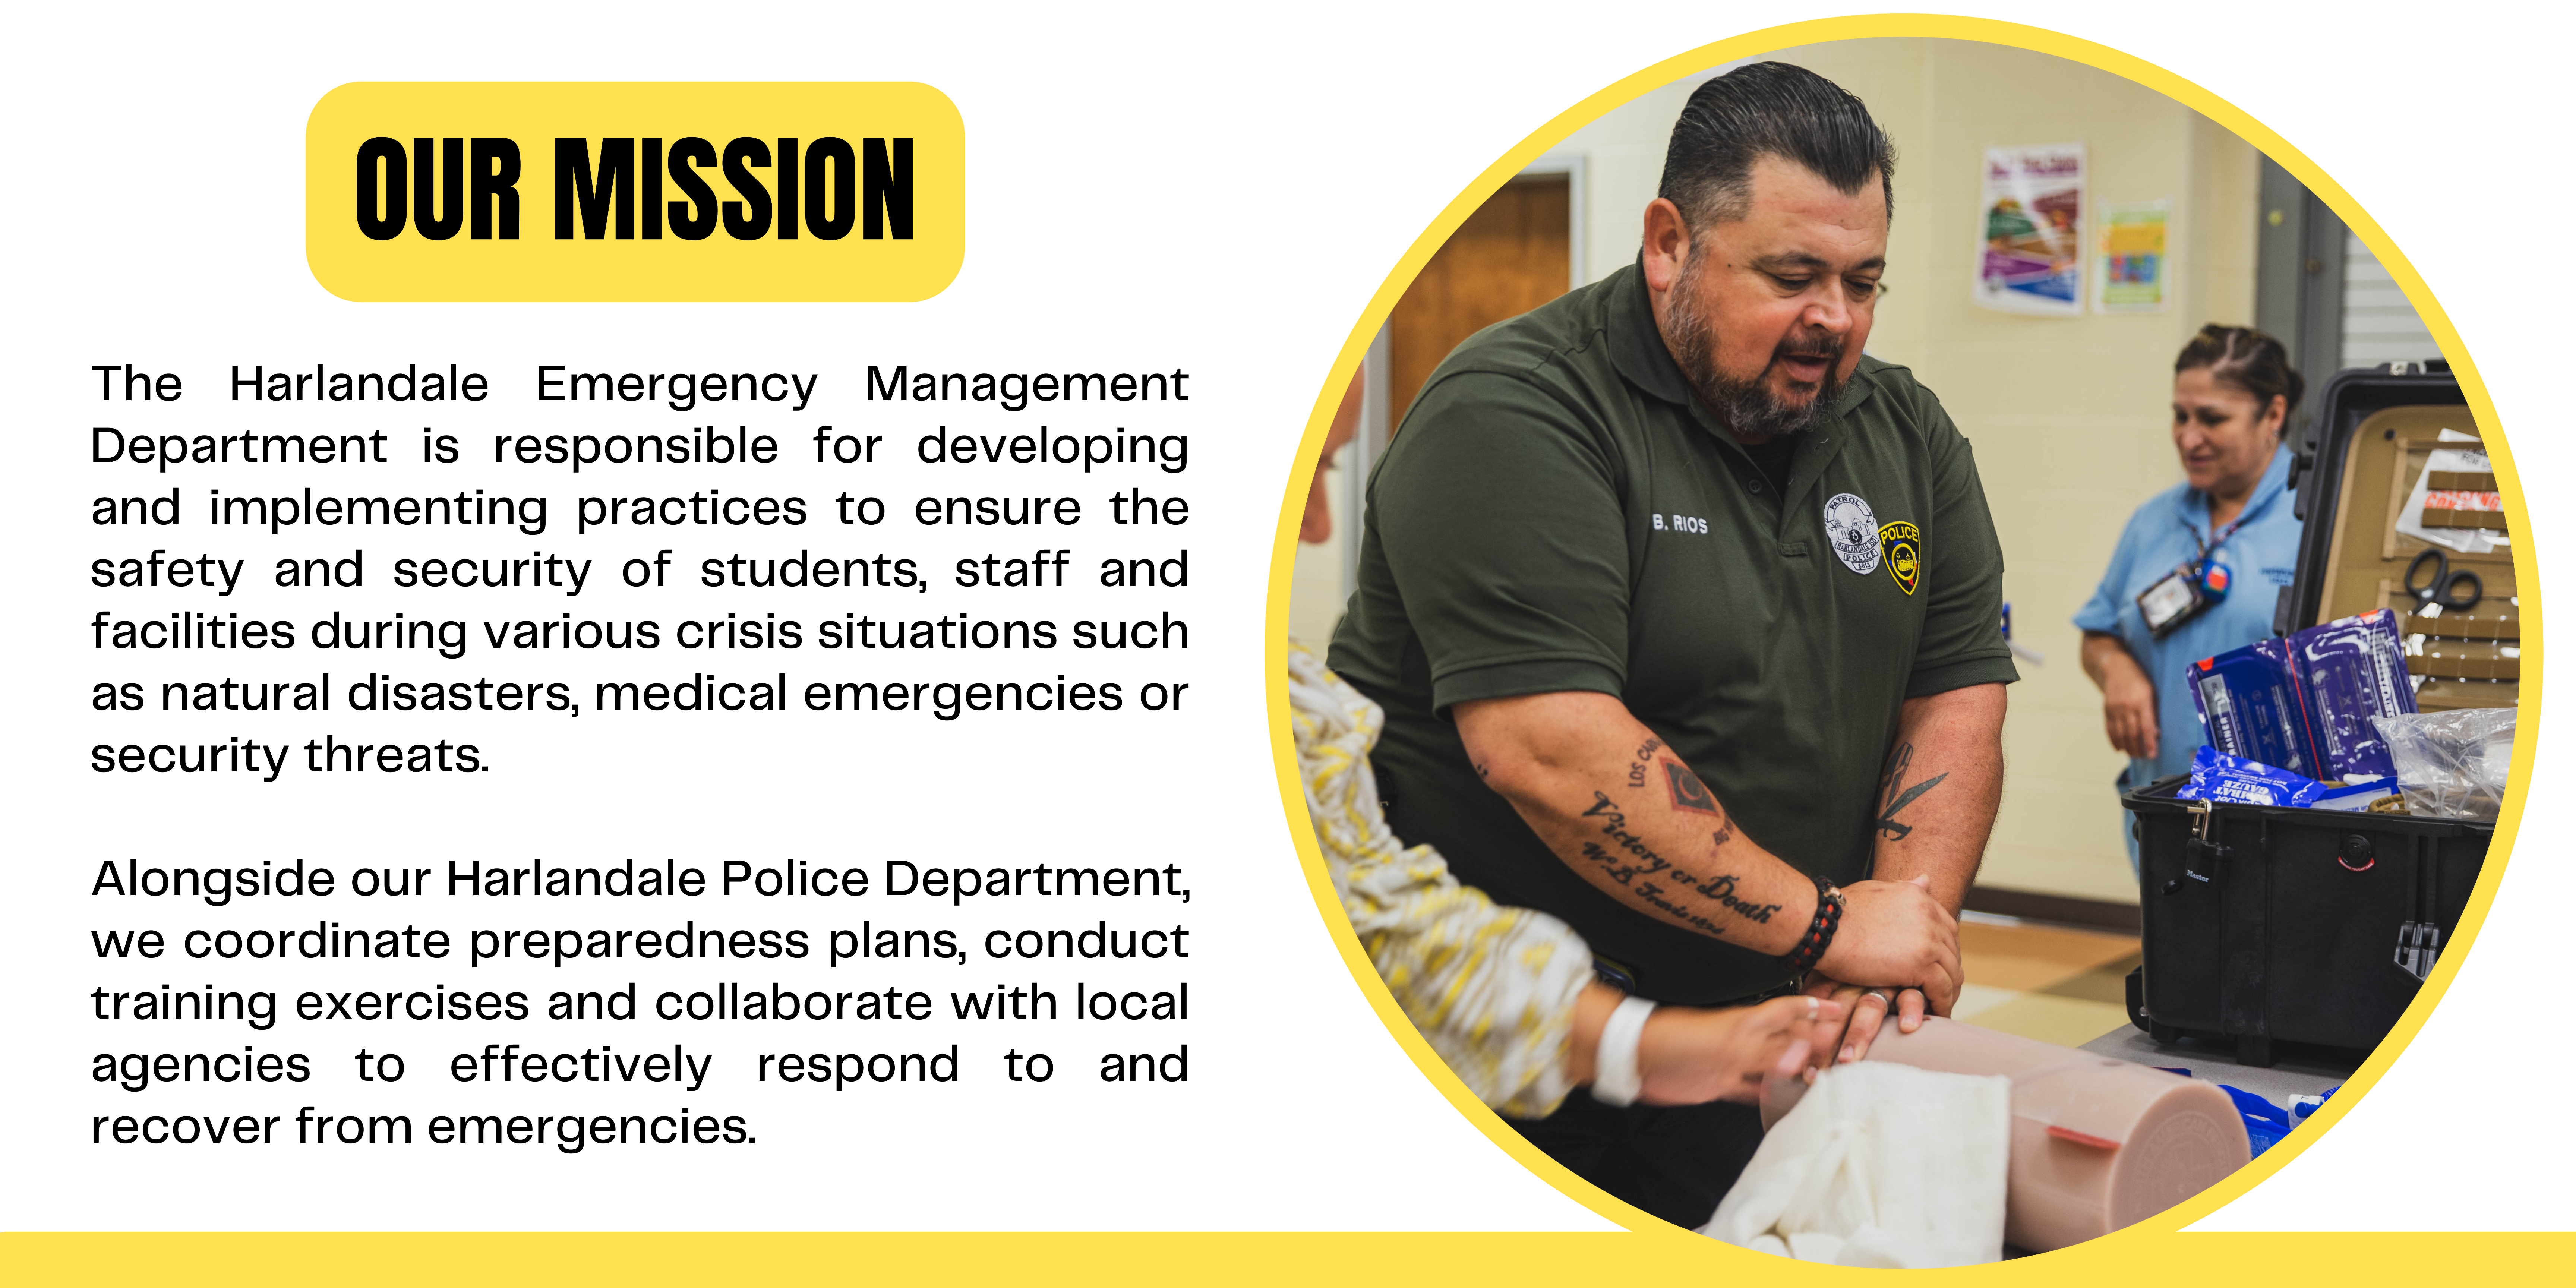 The Harlandale Emergency Management Department is responsible for developing and implementing practices to ensure the safety and security of students, staff and facilities during various crisis situations such as natural disasters, medical emergencies or security threats. Alongside our Harlandale Police Department, we  coordinate preparedness plans, conduct training exercises and collaborate with local agencies to effectively respond to and recover from emergencies.